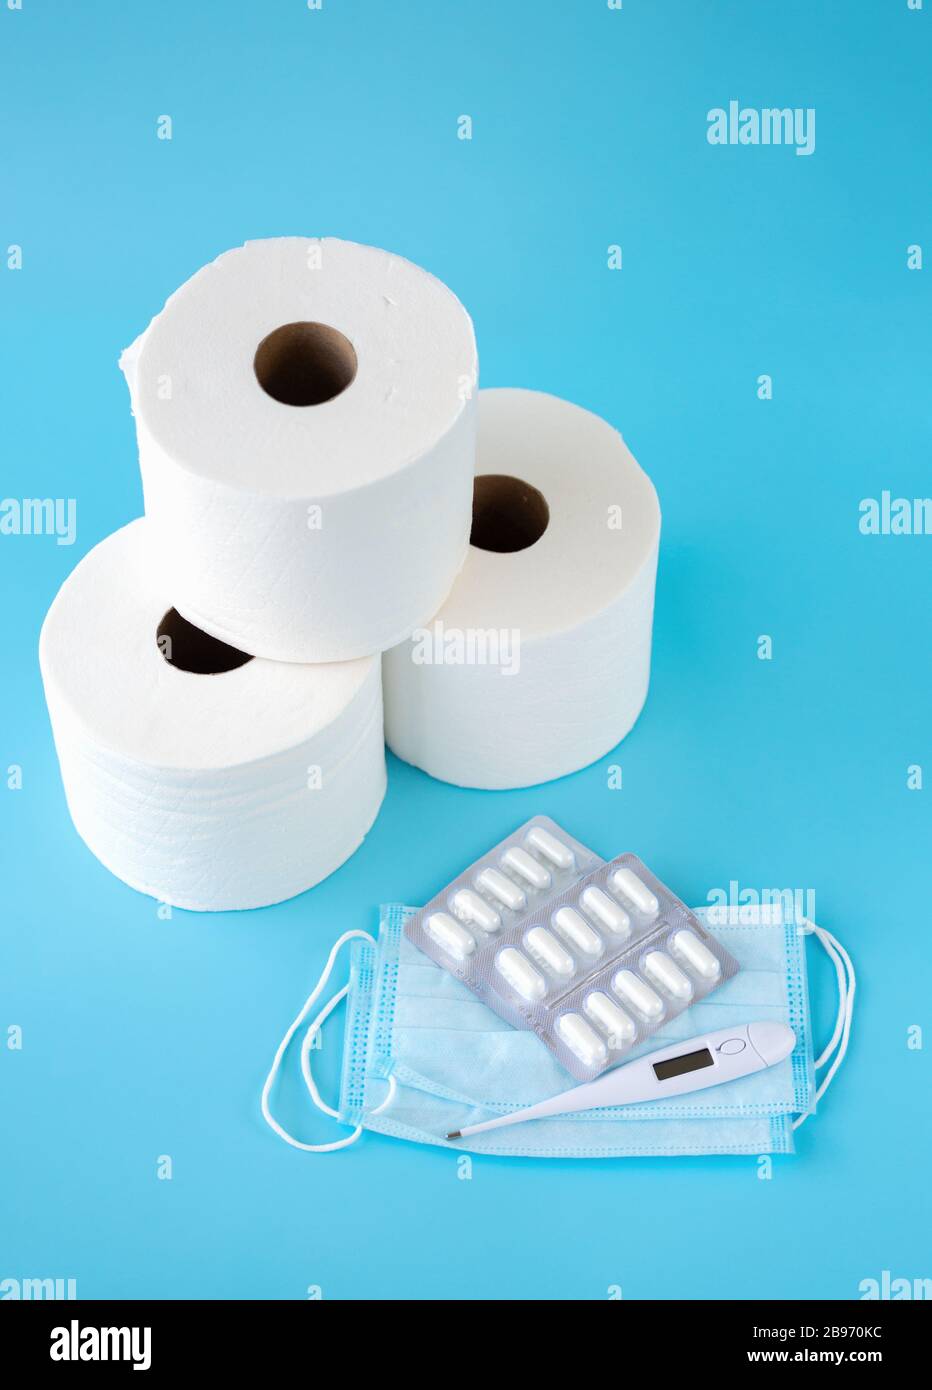 Face mask, thermometer, pills, tree toilet paper rolls on blue background. Medicine supplies for home coronavirus COVID-19 quarantine. Copy Space Stock Photo